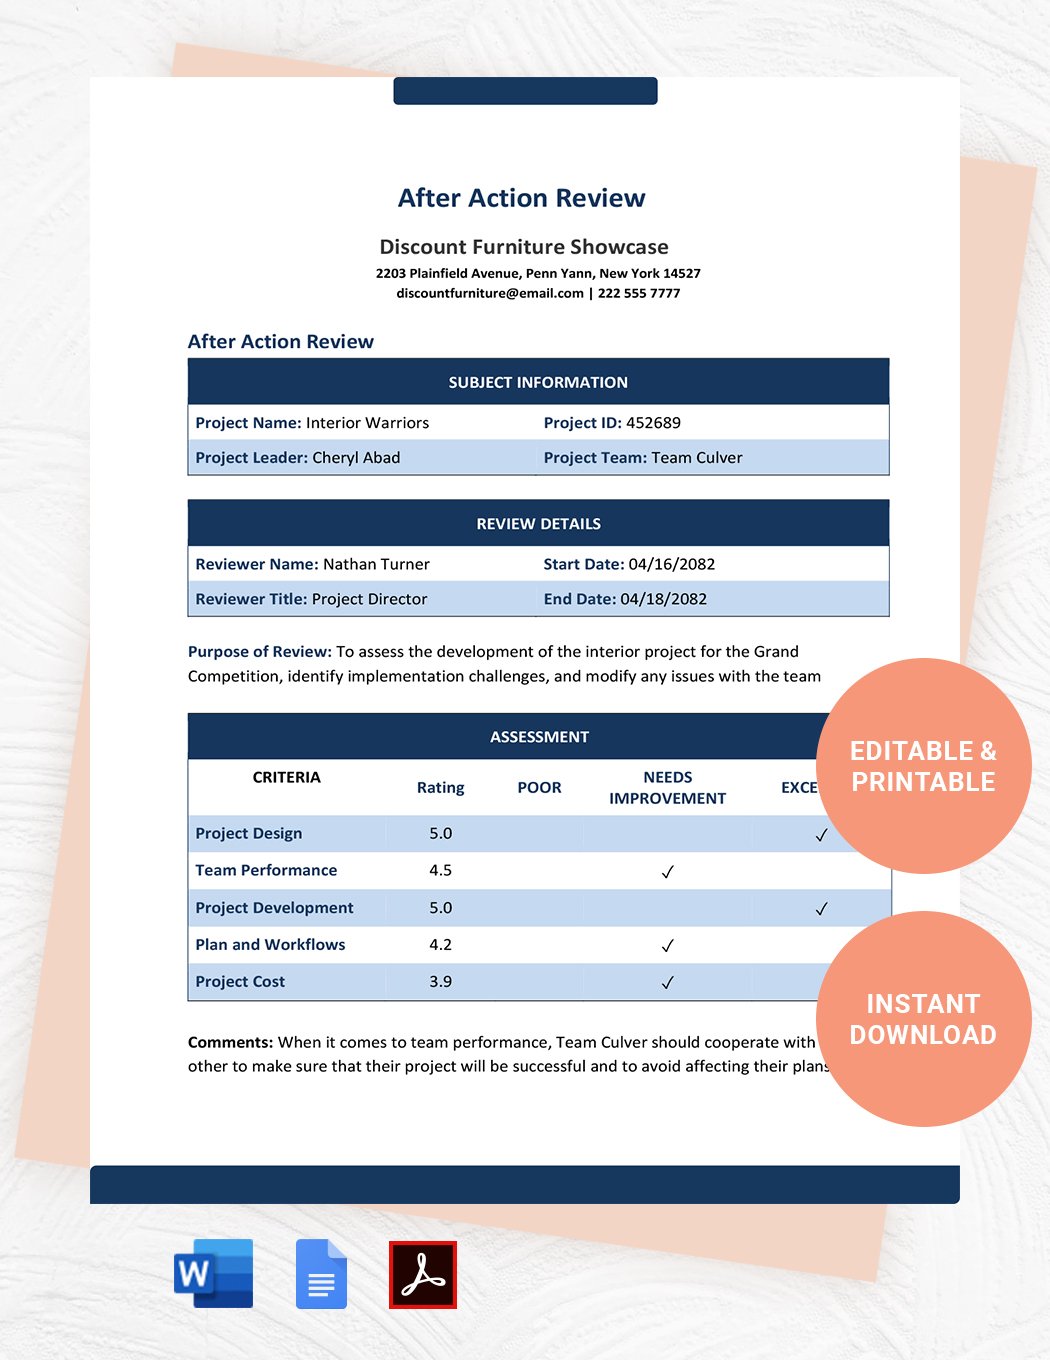 After Action Review Template in Word, Google Docs